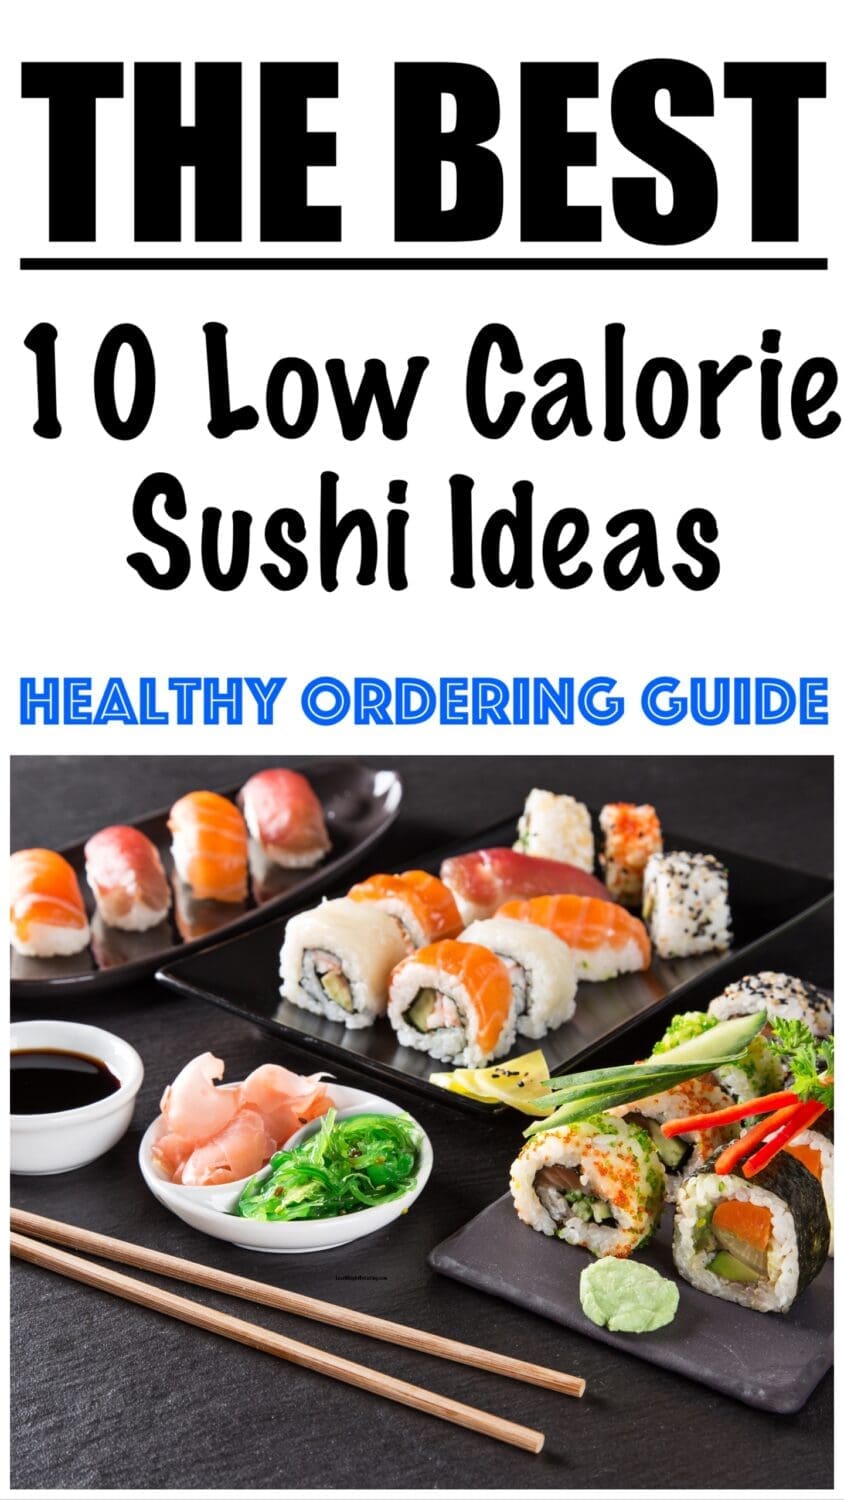 10 Low Calorie Sushi Ideas (Healthy Ordering Guide)